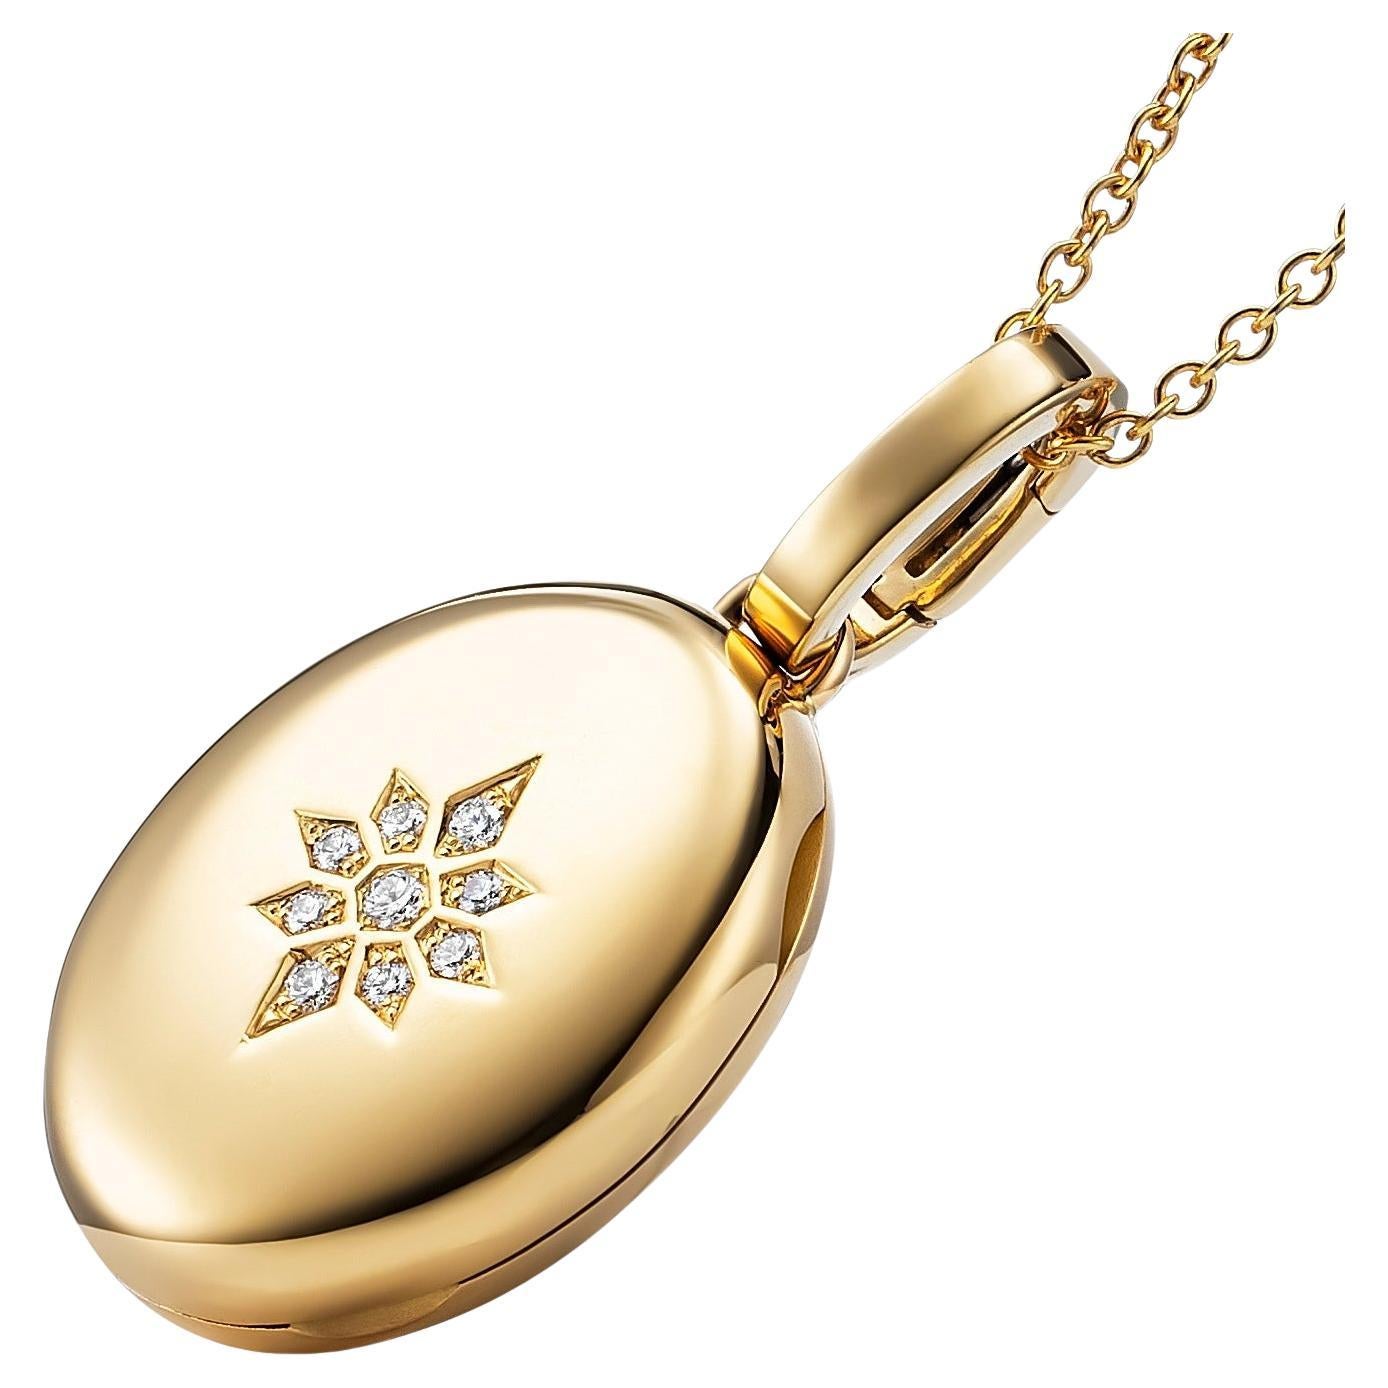 Heavy Oval Locket Pendant Necklace 18k Yellow Gold  Star Motif with 9 Diamonds For Sale